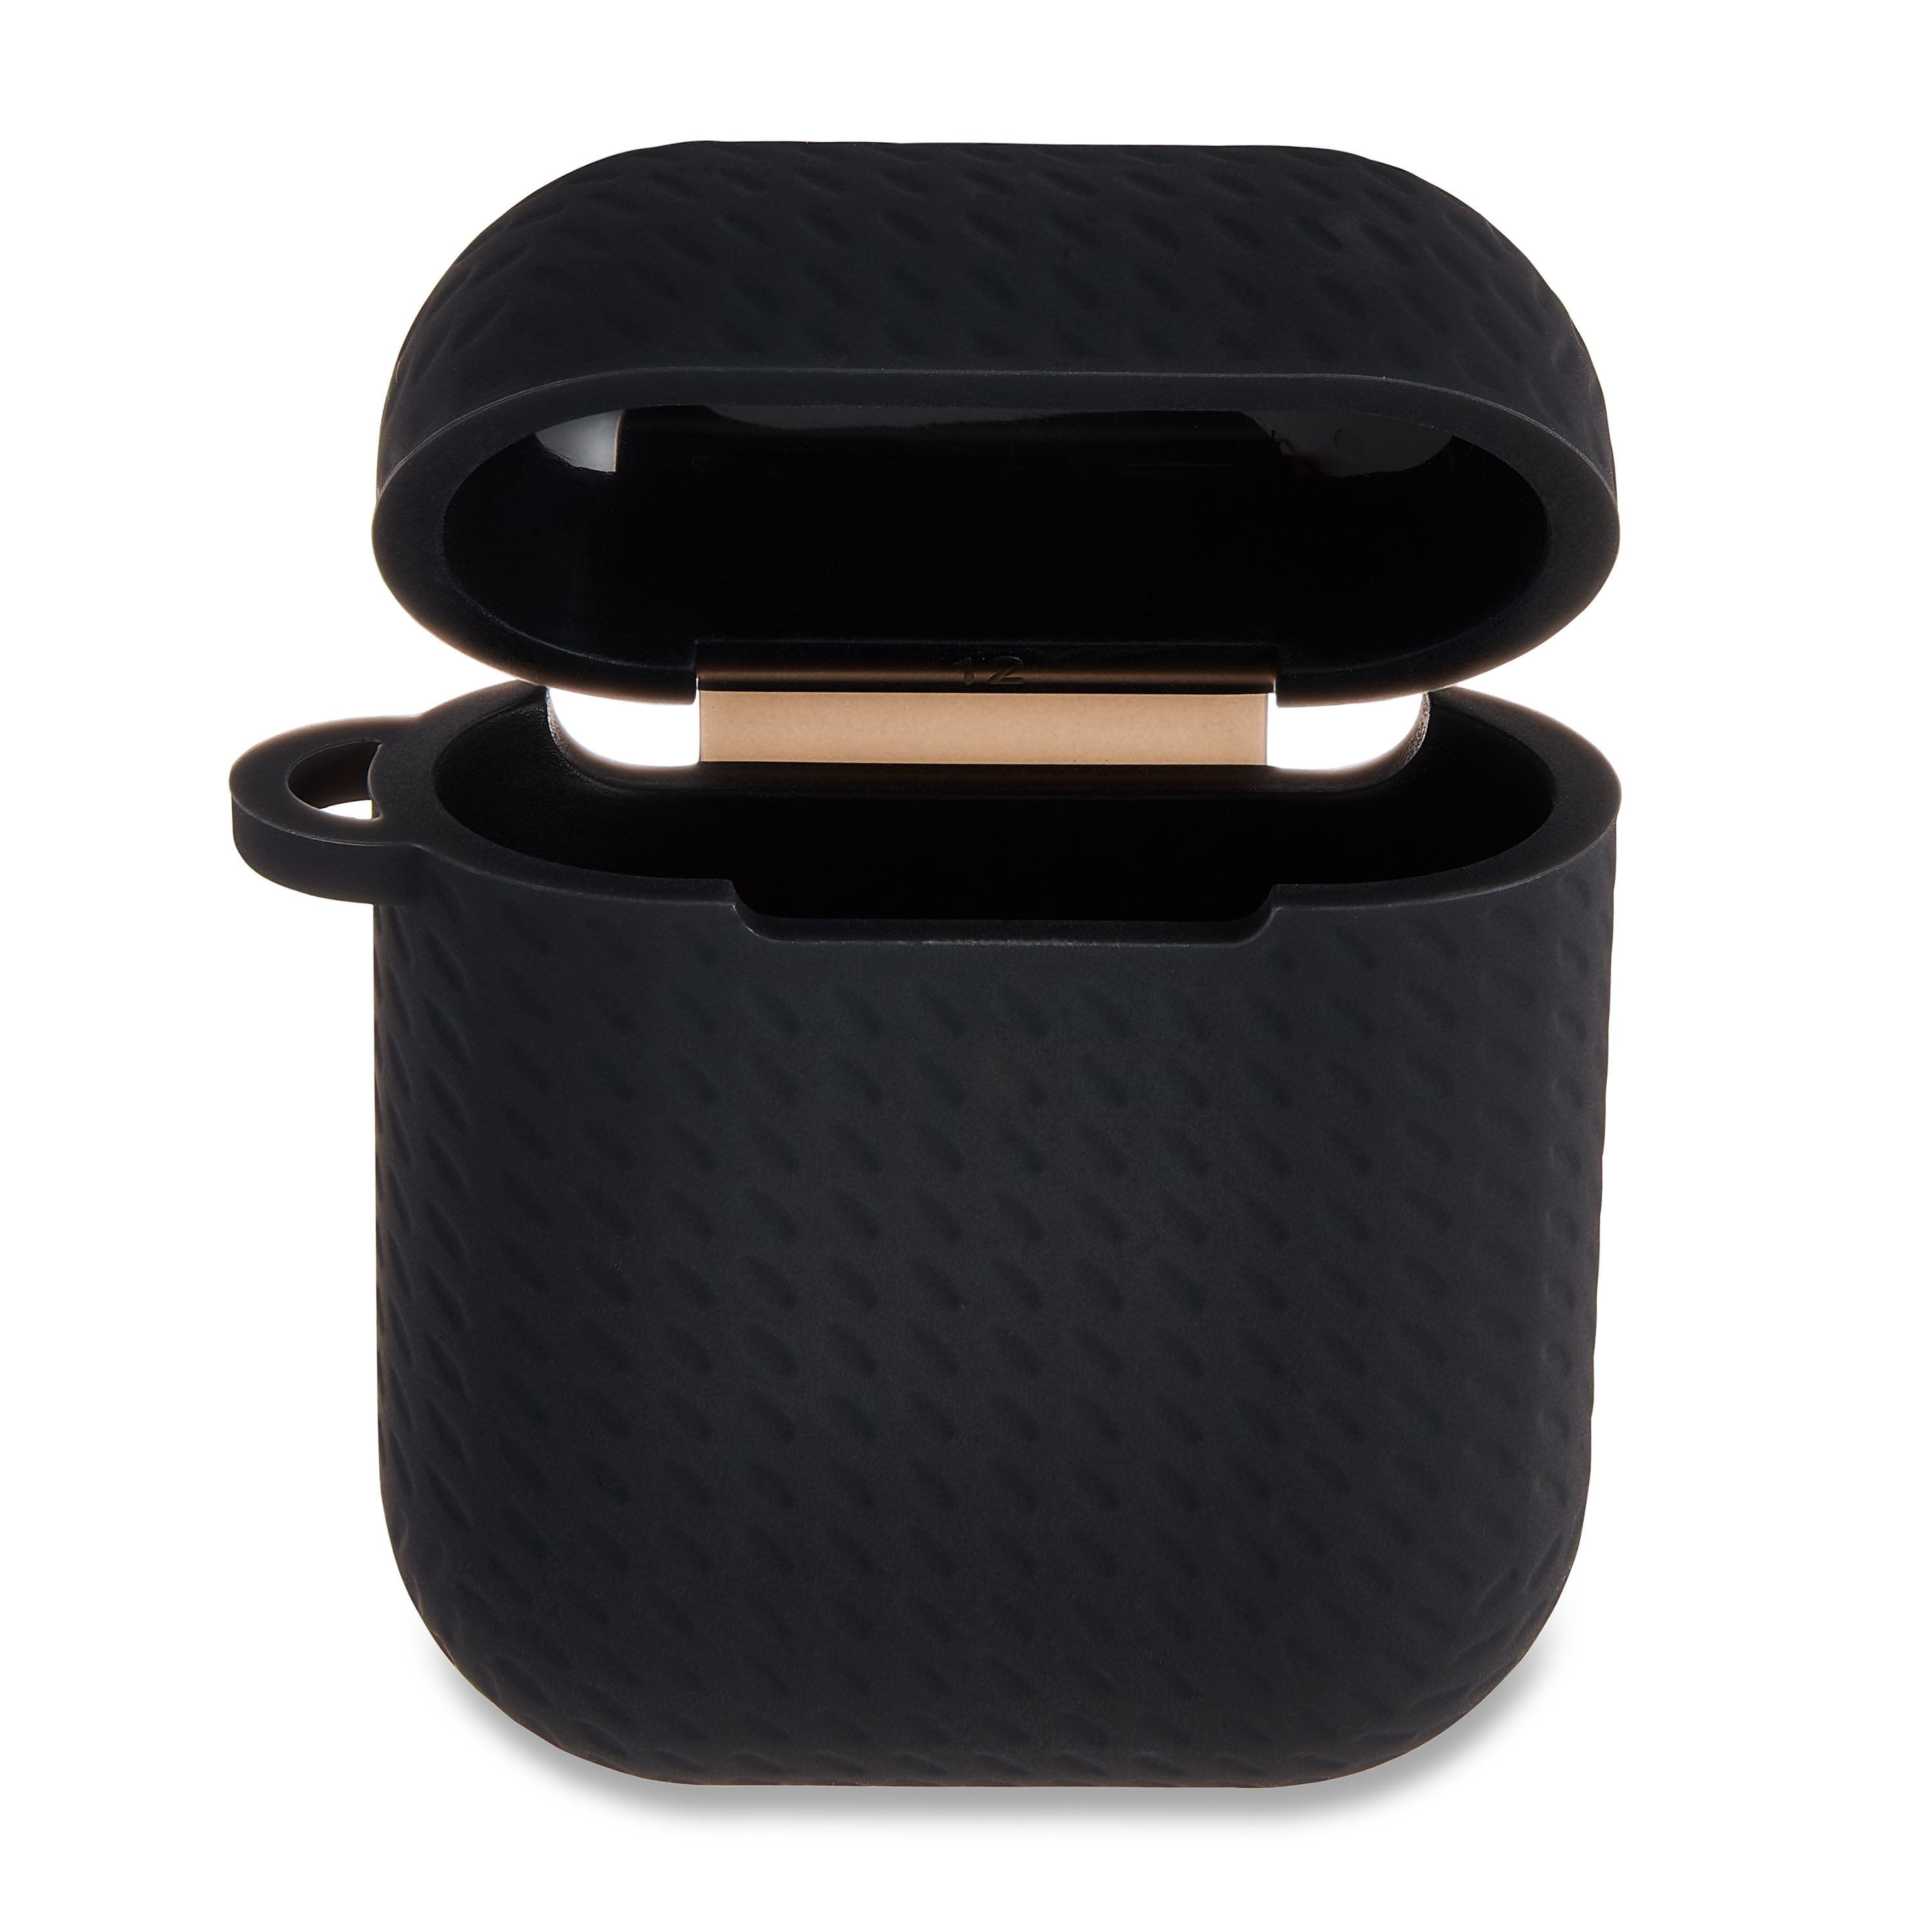 Black Textured Cover for AirPods Charging Case